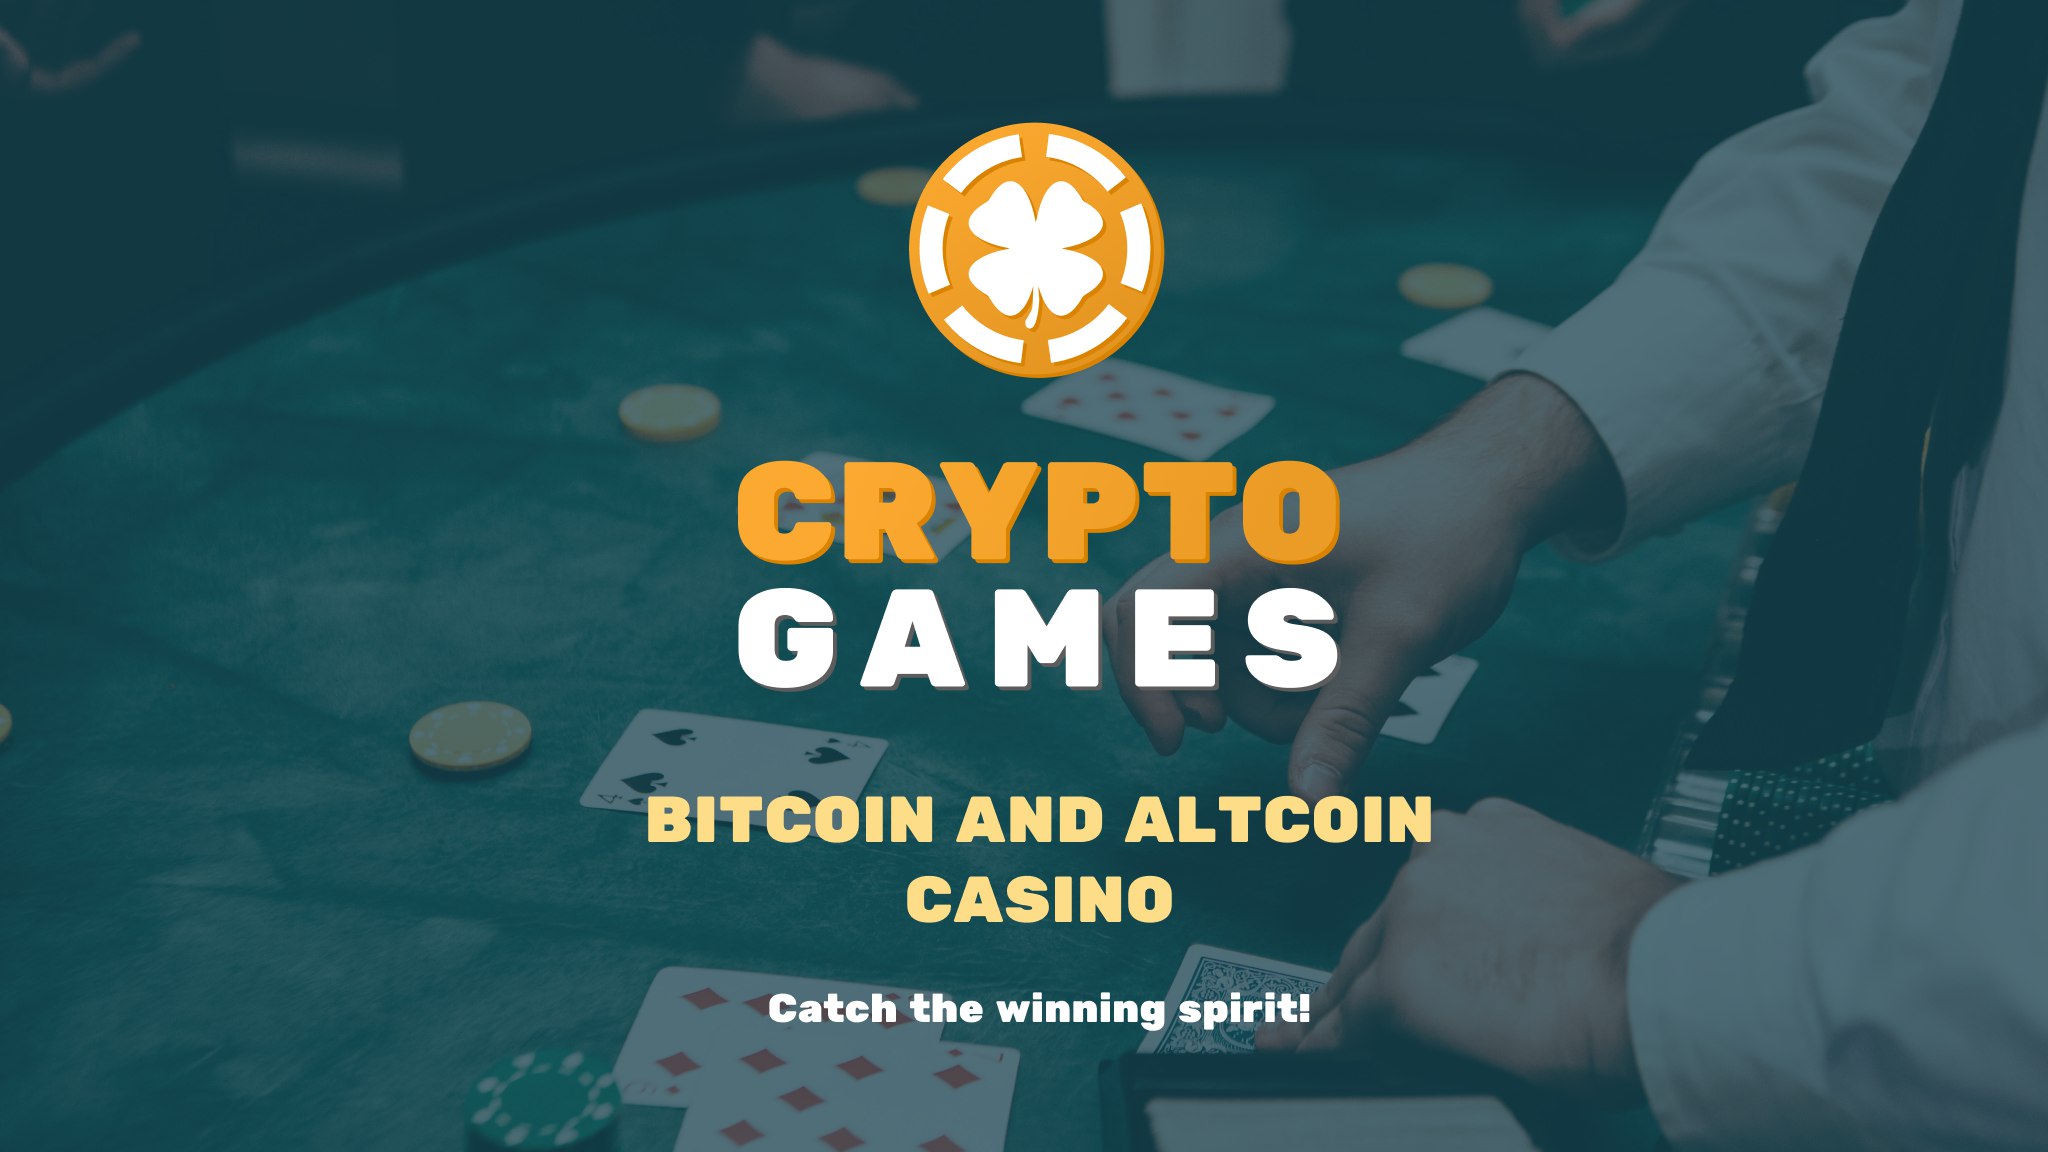 CryptoGames Becomes the Forerunner With the Inclusion of Solana